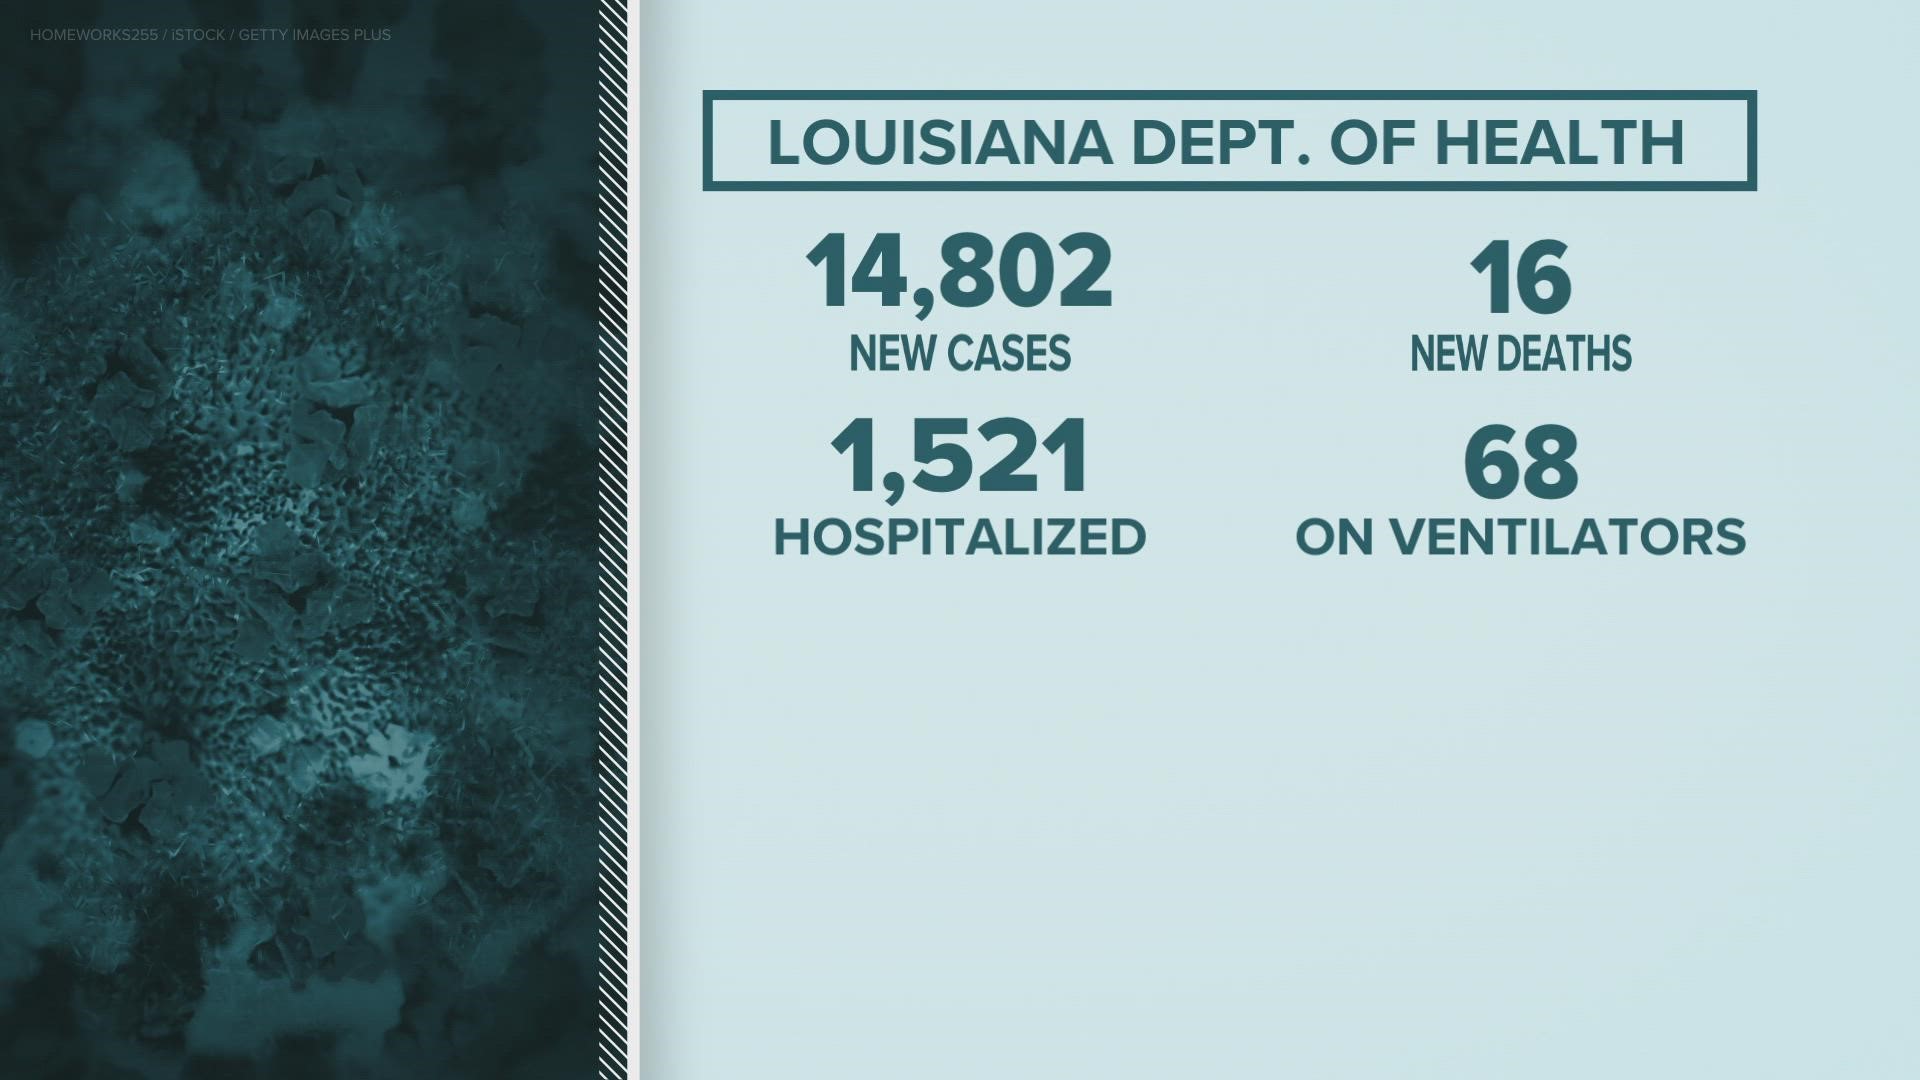 The Louisana Department of Health announced more than 14,800 new COVID-19 cases, Friday.